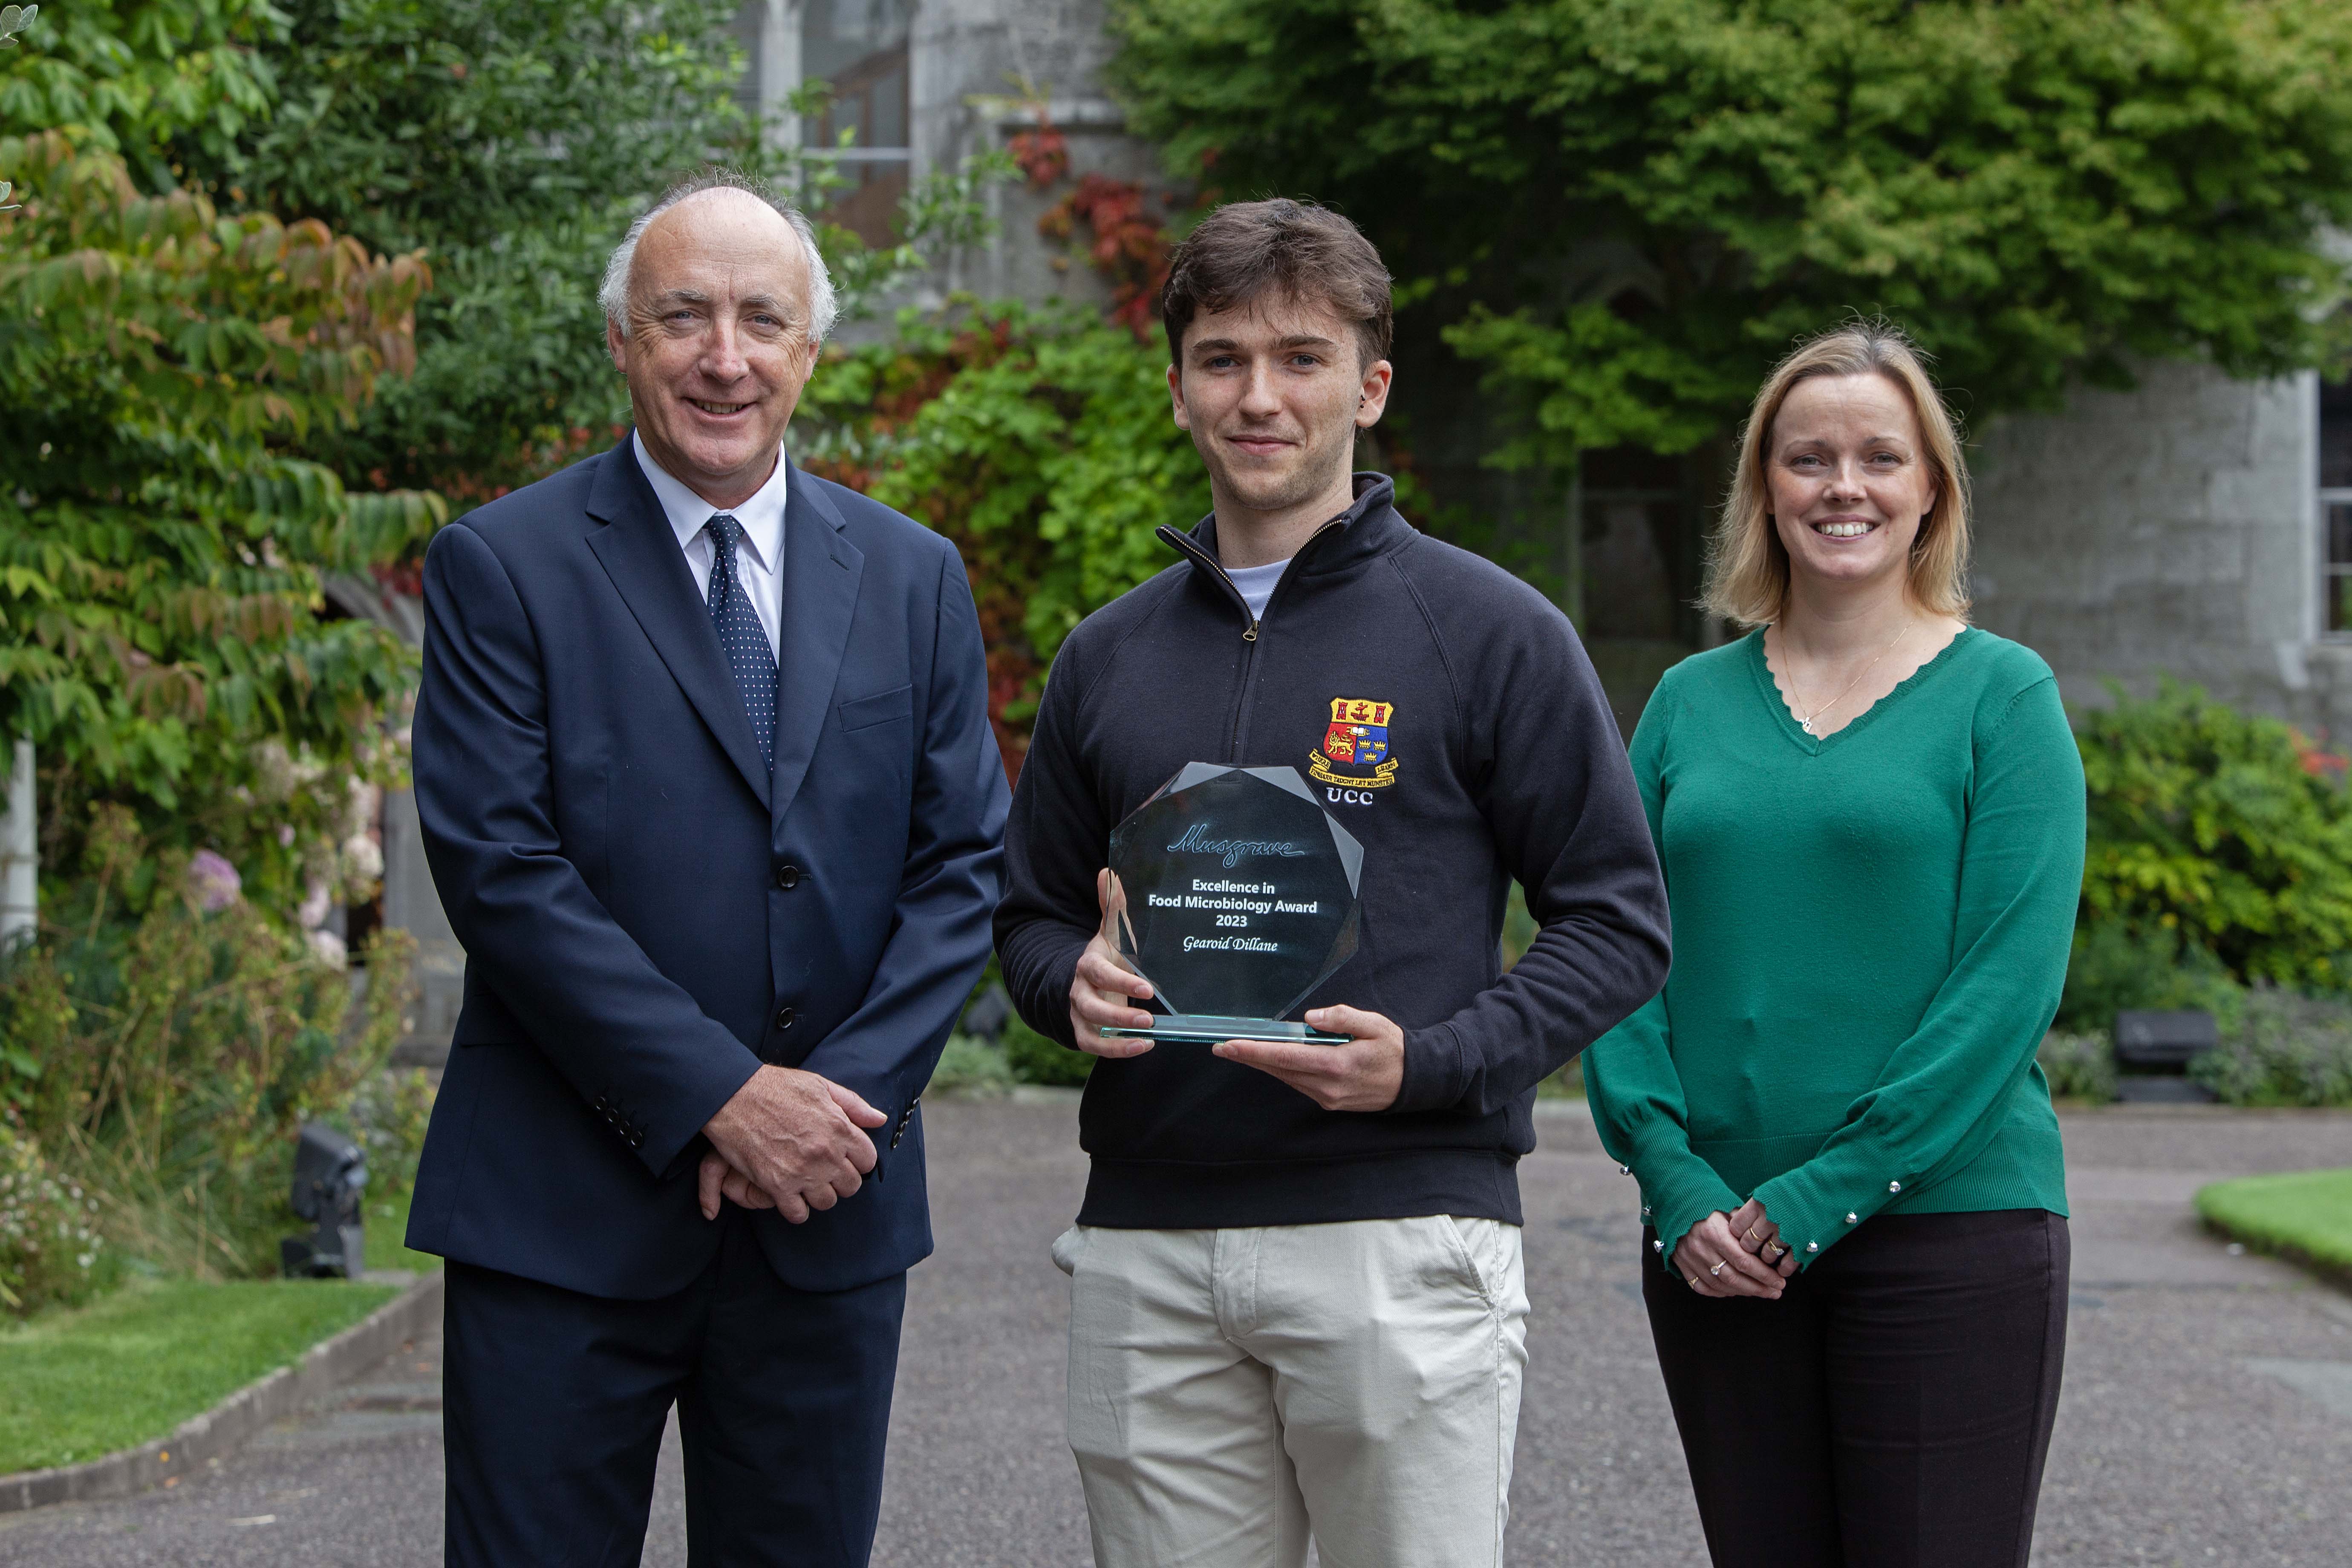 Winner announced for the UCC  Musgrave Award for Excellence in Food Microbiology